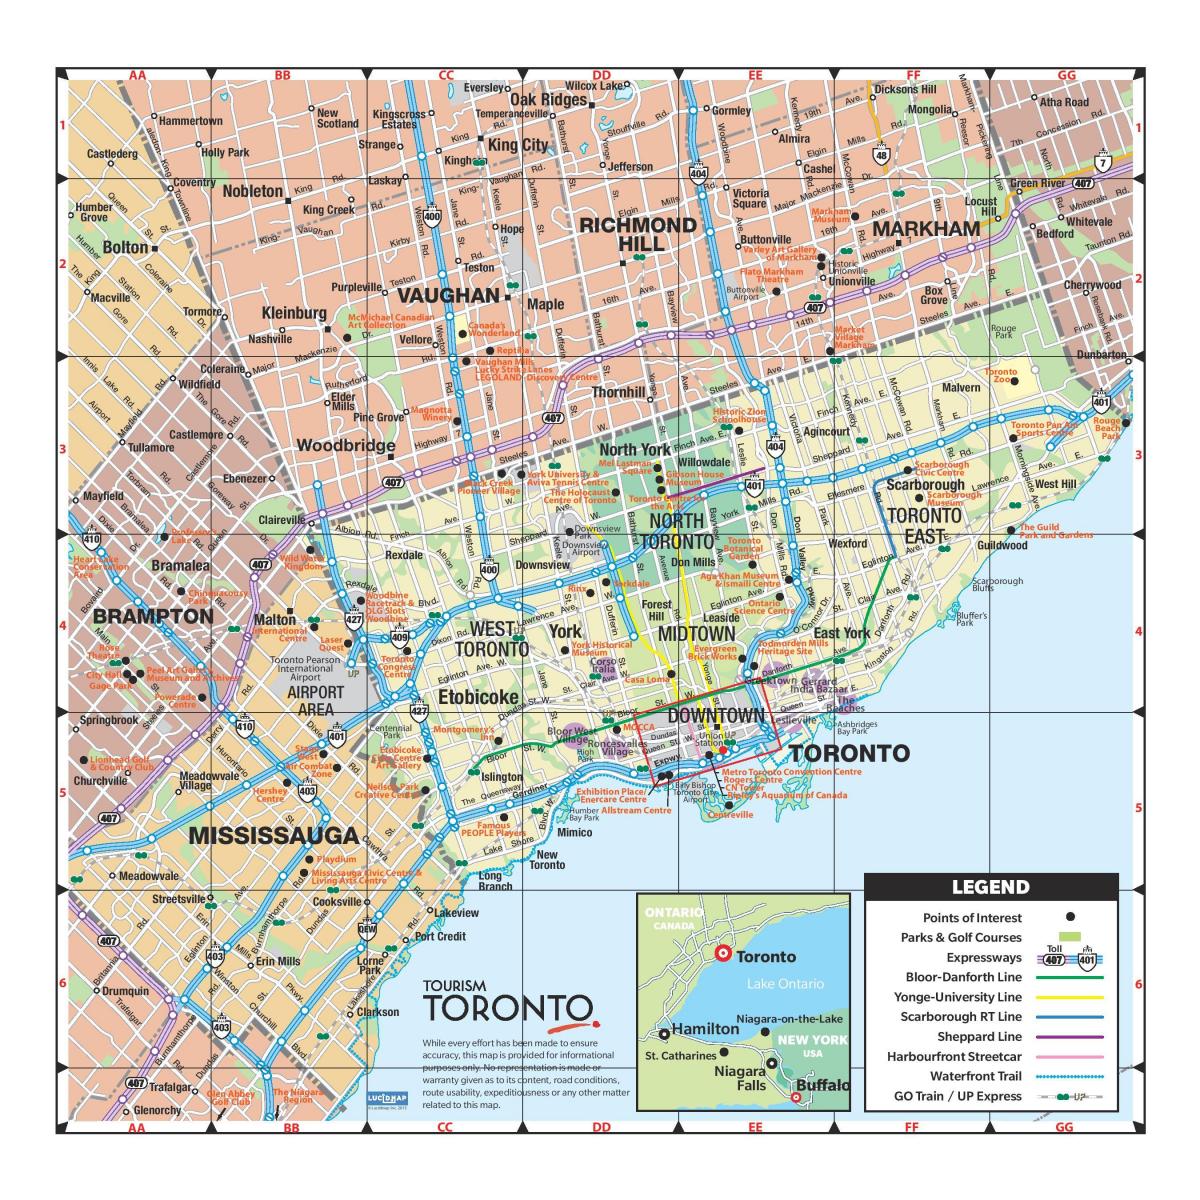 Map of greater Toronto area